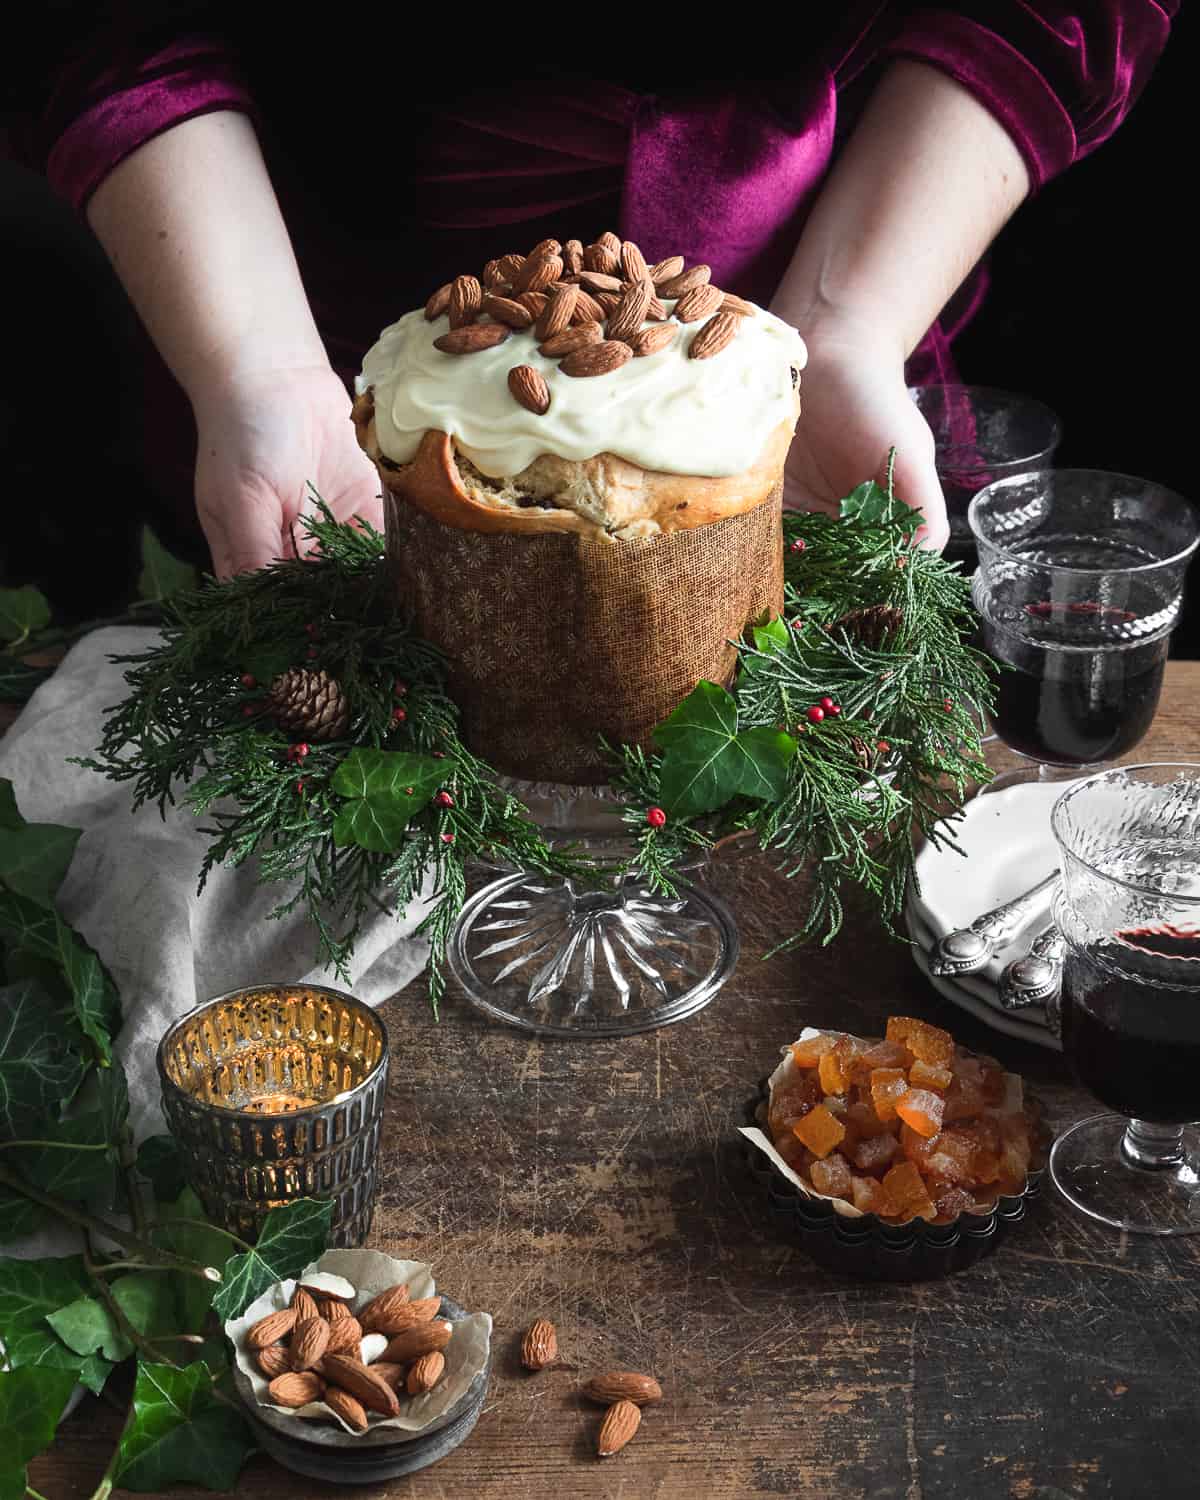 Italian Christmas cake recipe with hands holding it 